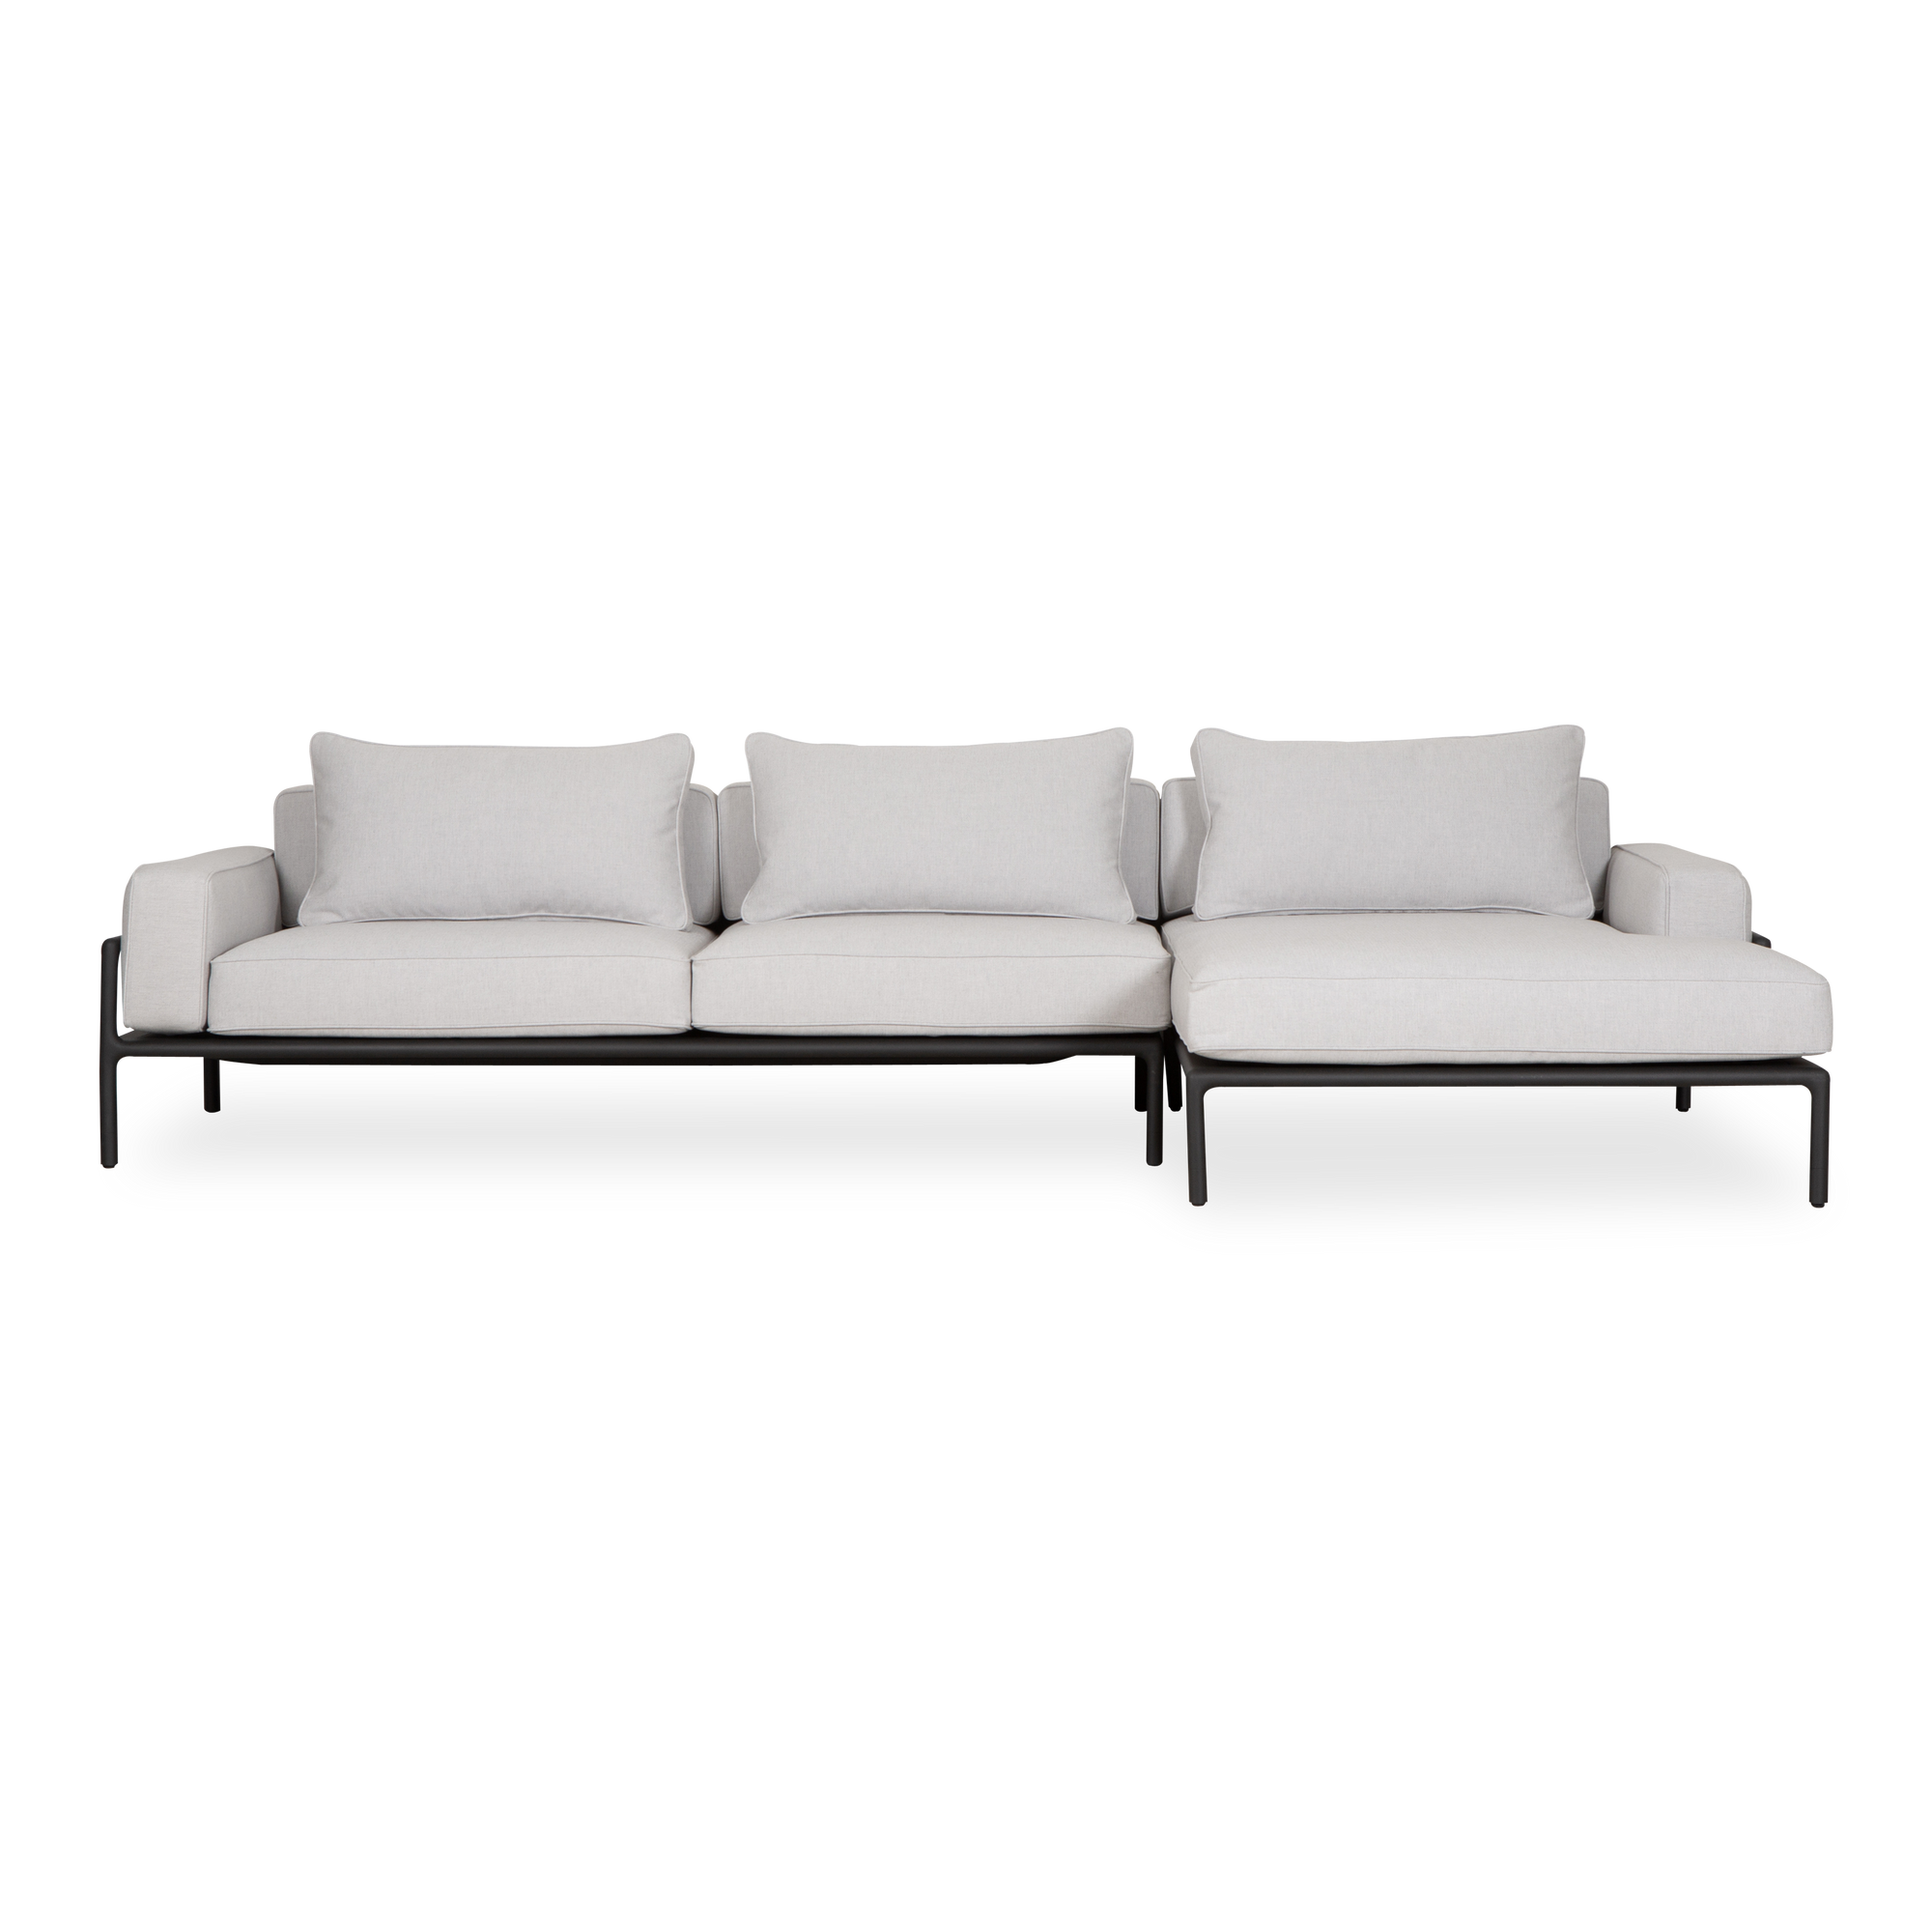 The Moto Modular Sectional features a distinctive low profile metal frame paired with a luxurious cushion system.